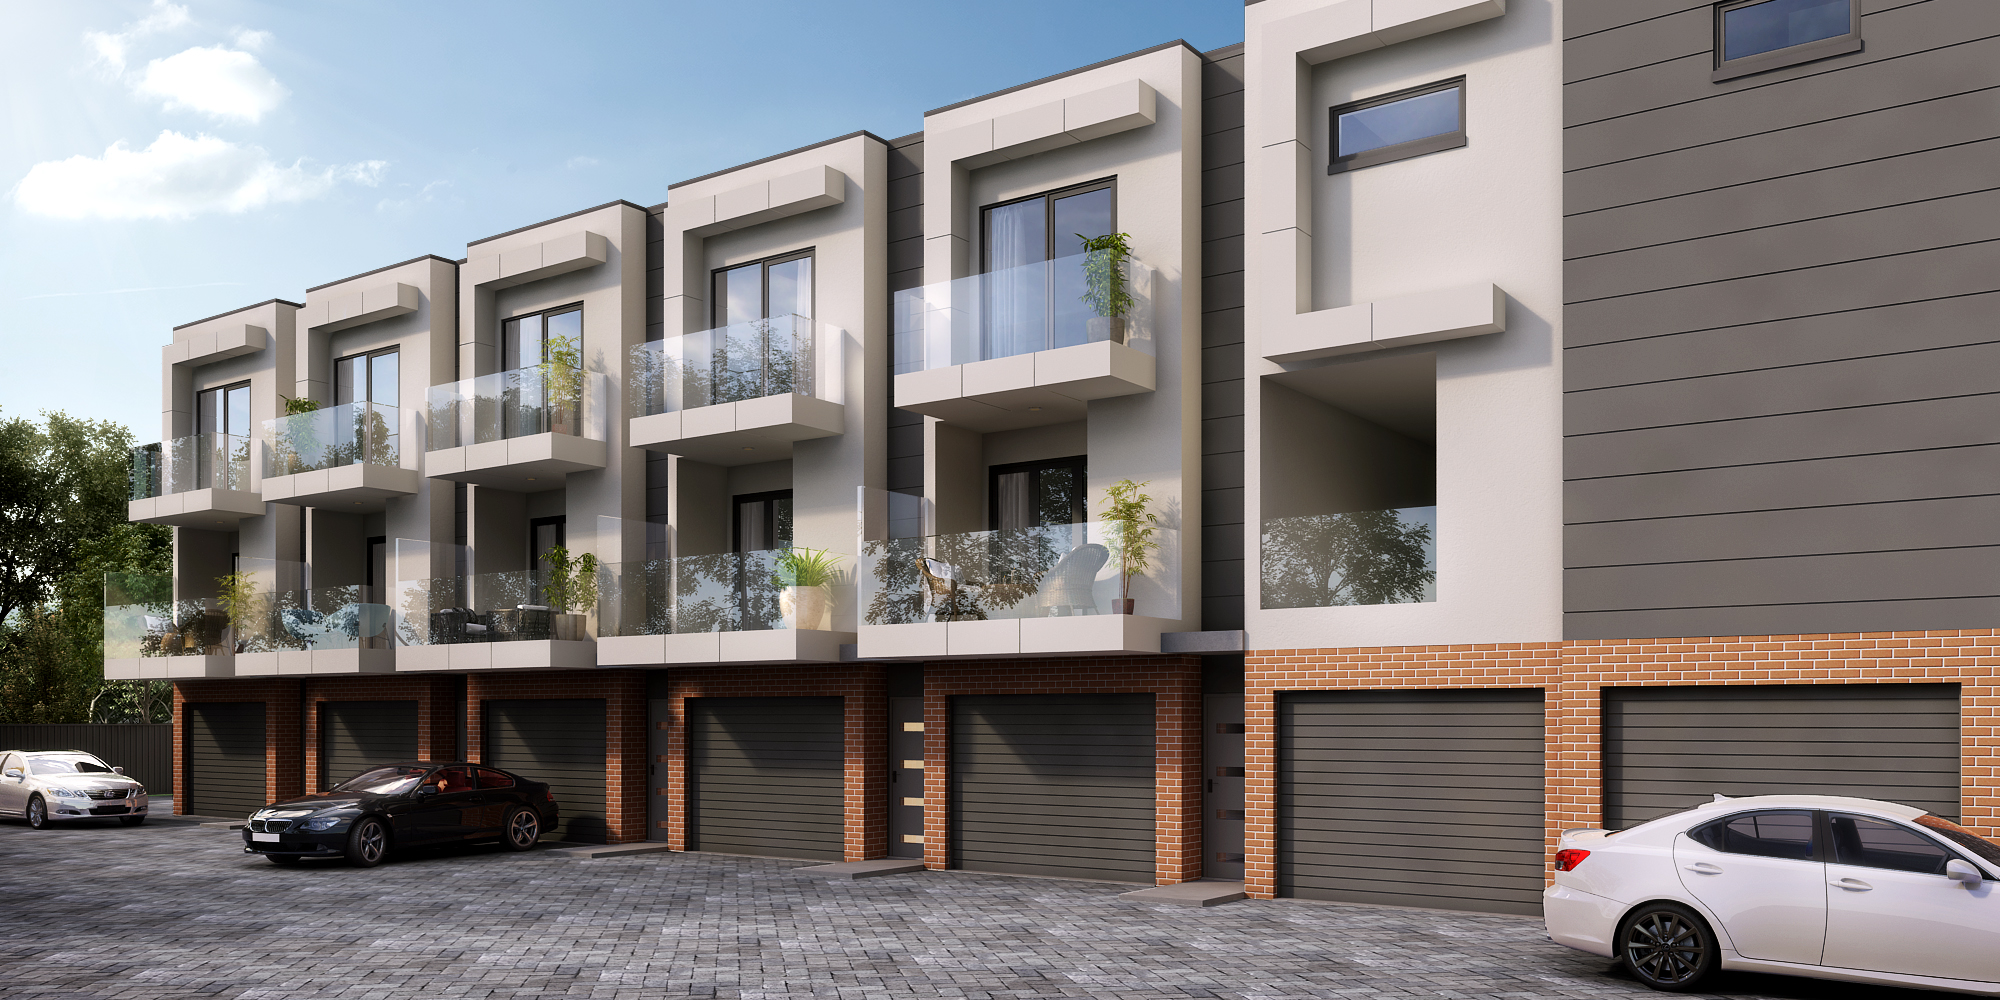 Magnificent 3 and 4 bedroom Prospect townhouses from $489,000